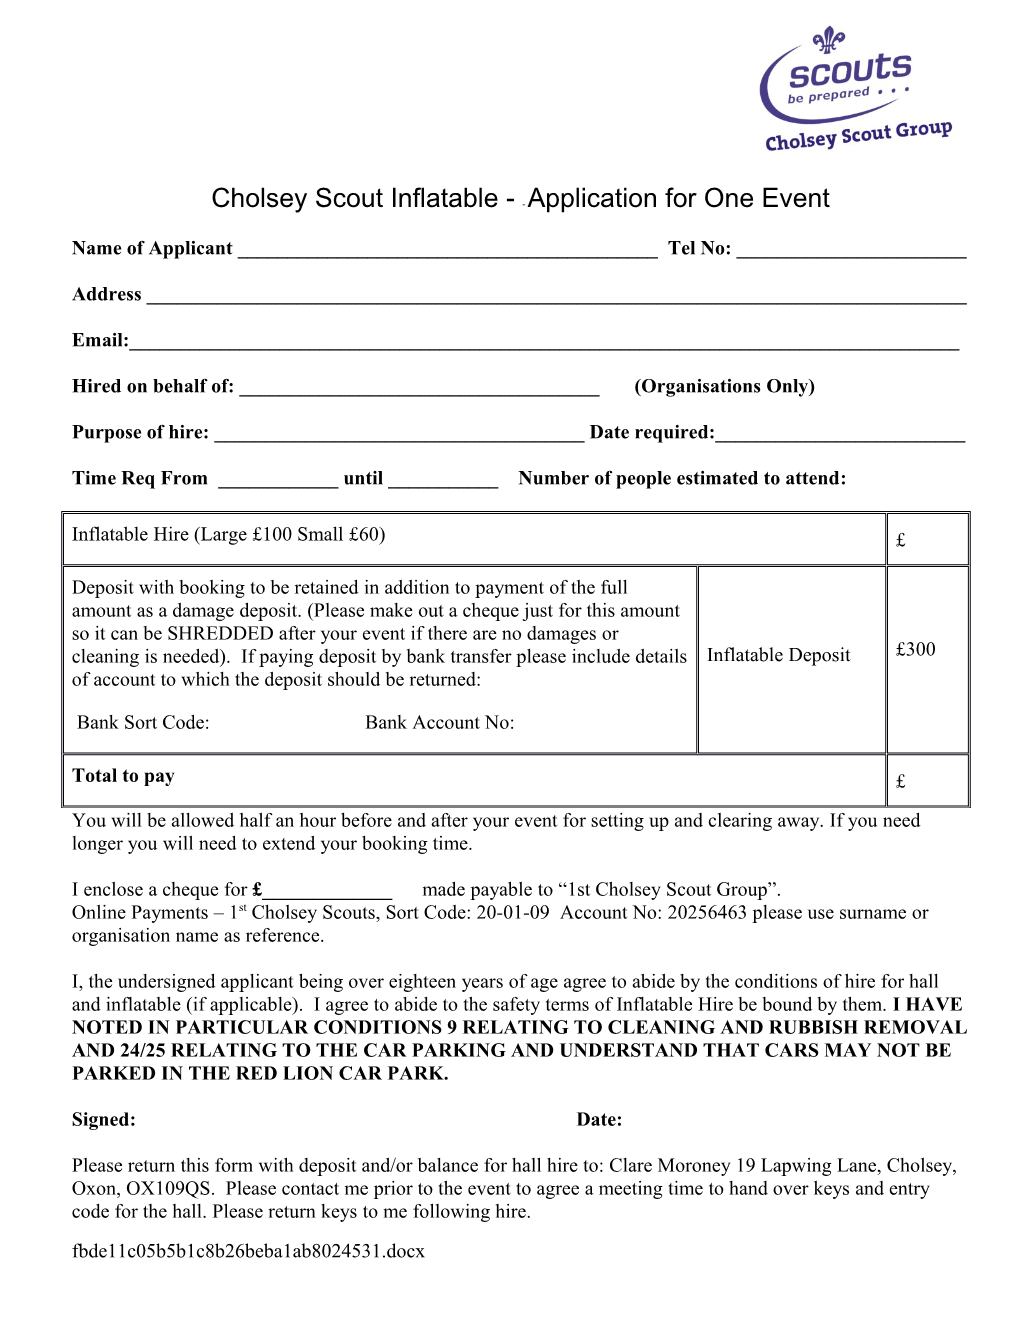 Cholsey Scout Hall - Application for One Event